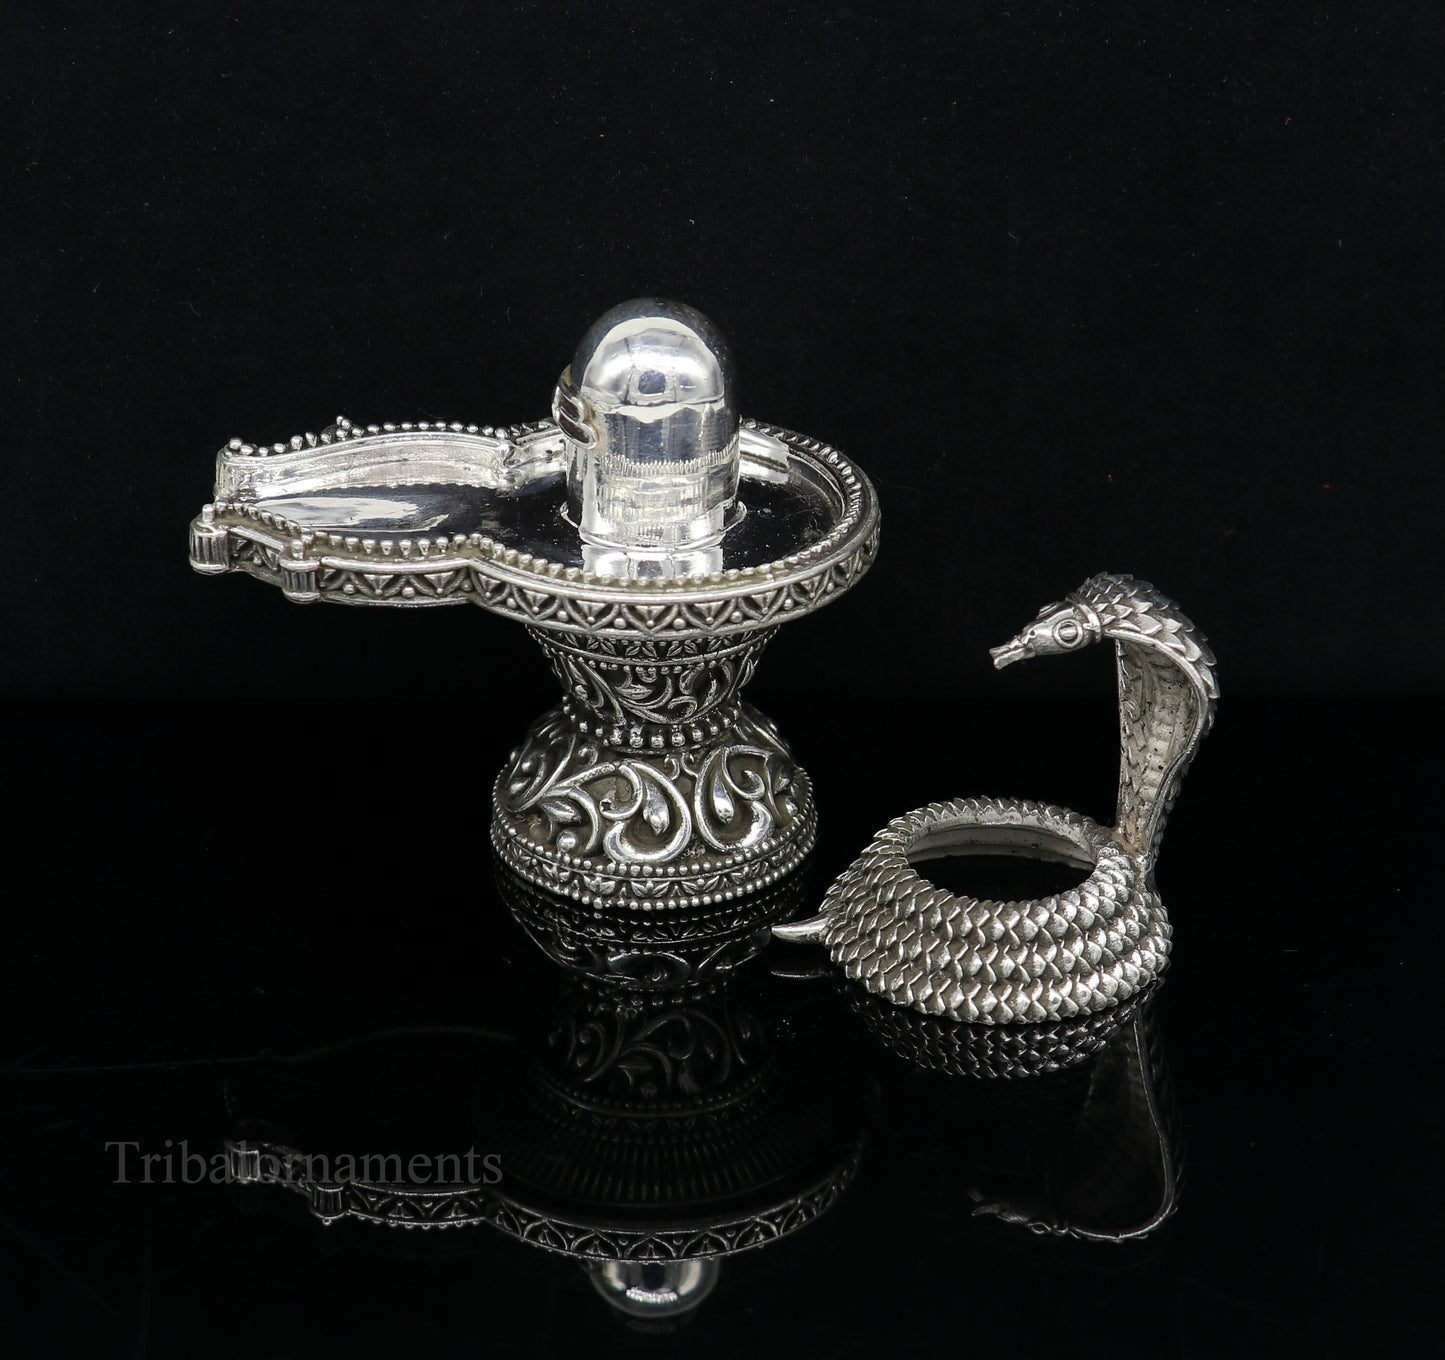 925 fine solid sterling silver lord Shiva lingam Jalheri With Snake, Stunning Divine god Shiva lingam, awesome handmade temple article su482 - TRIBAL ORNAMENTS